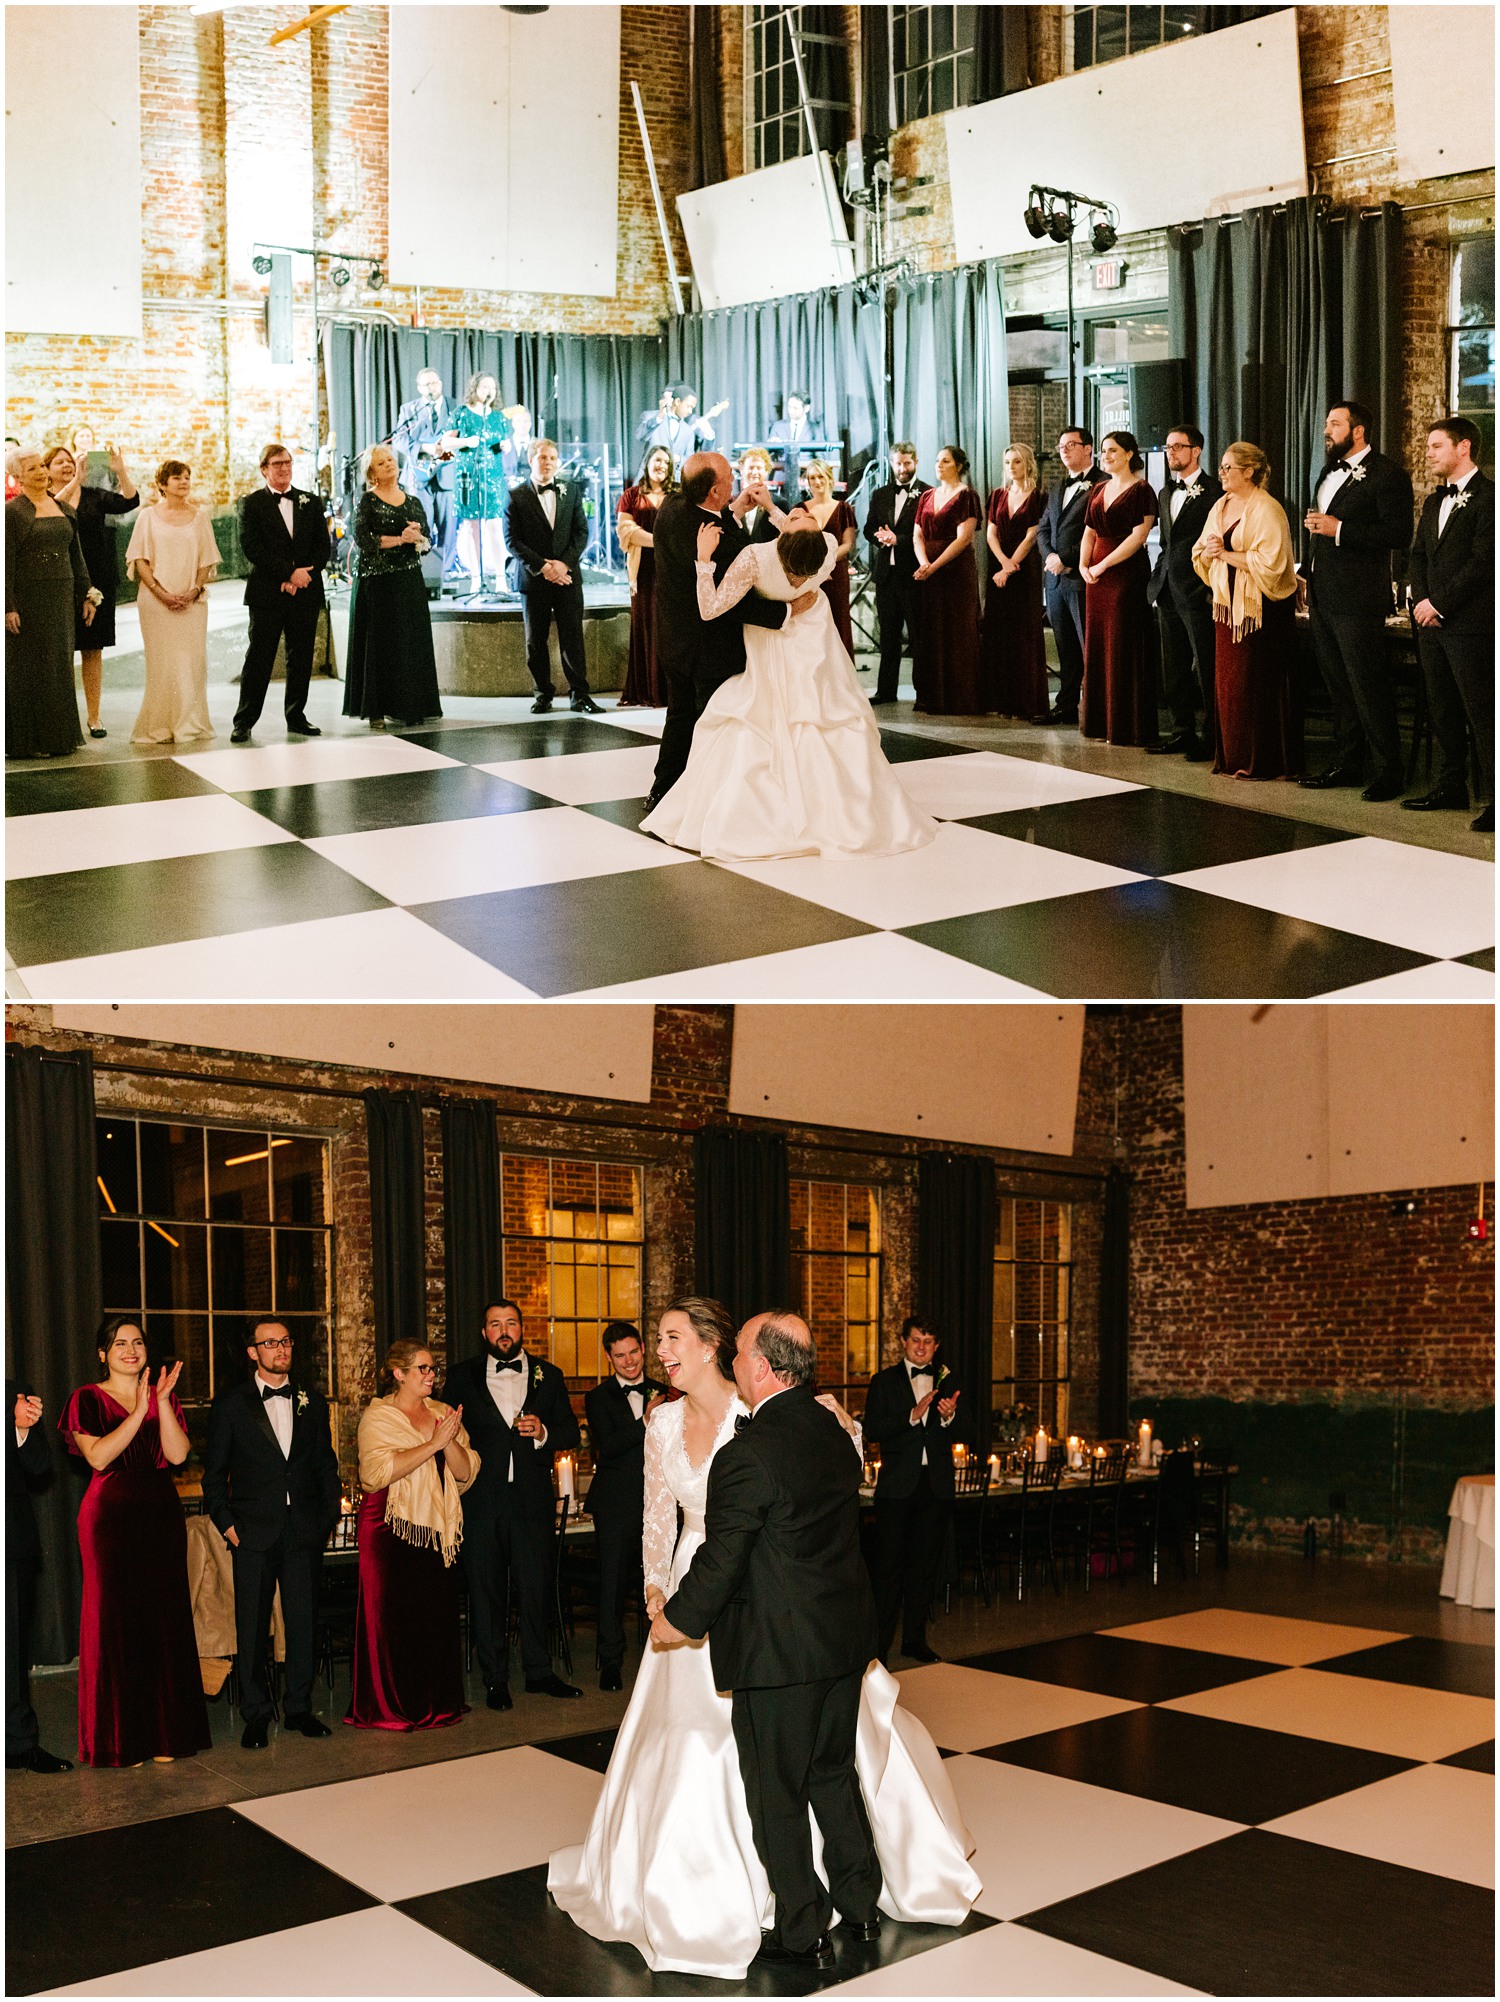 father-daughter dance at Cadillac Service Garage with Chelsea Renay Photography